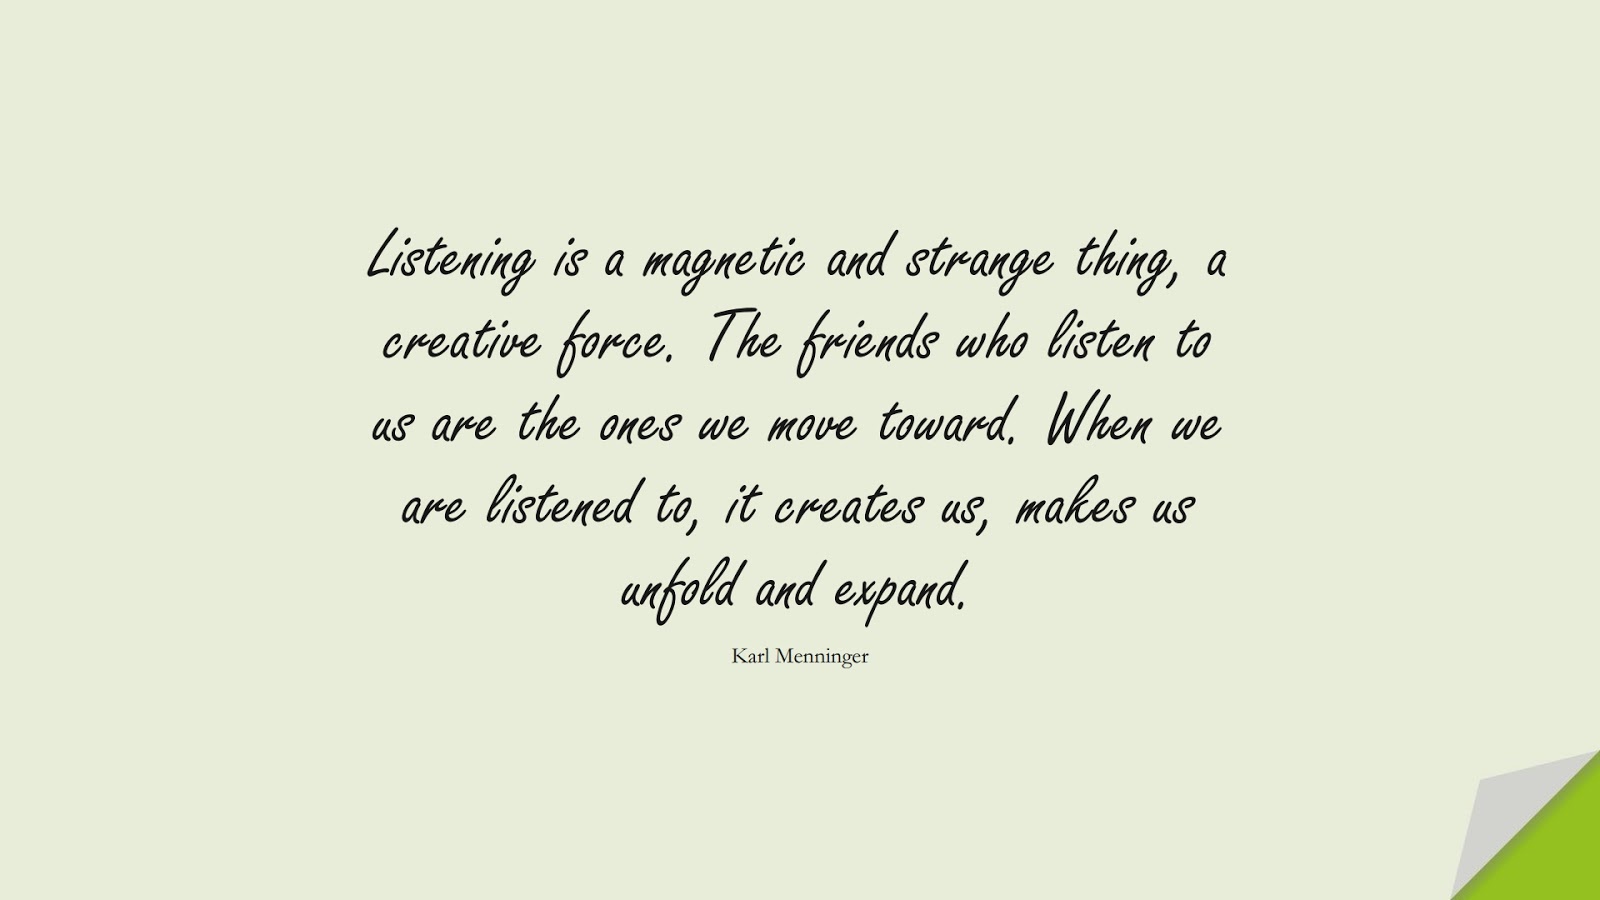 Listening is a magnetic and strange thing, a creative force. The friends who listen to us are the ones we move toward. When we are listened to, it creates us, makes us unfold and expand. (Karl Menninger);  #FriendshipQuotes